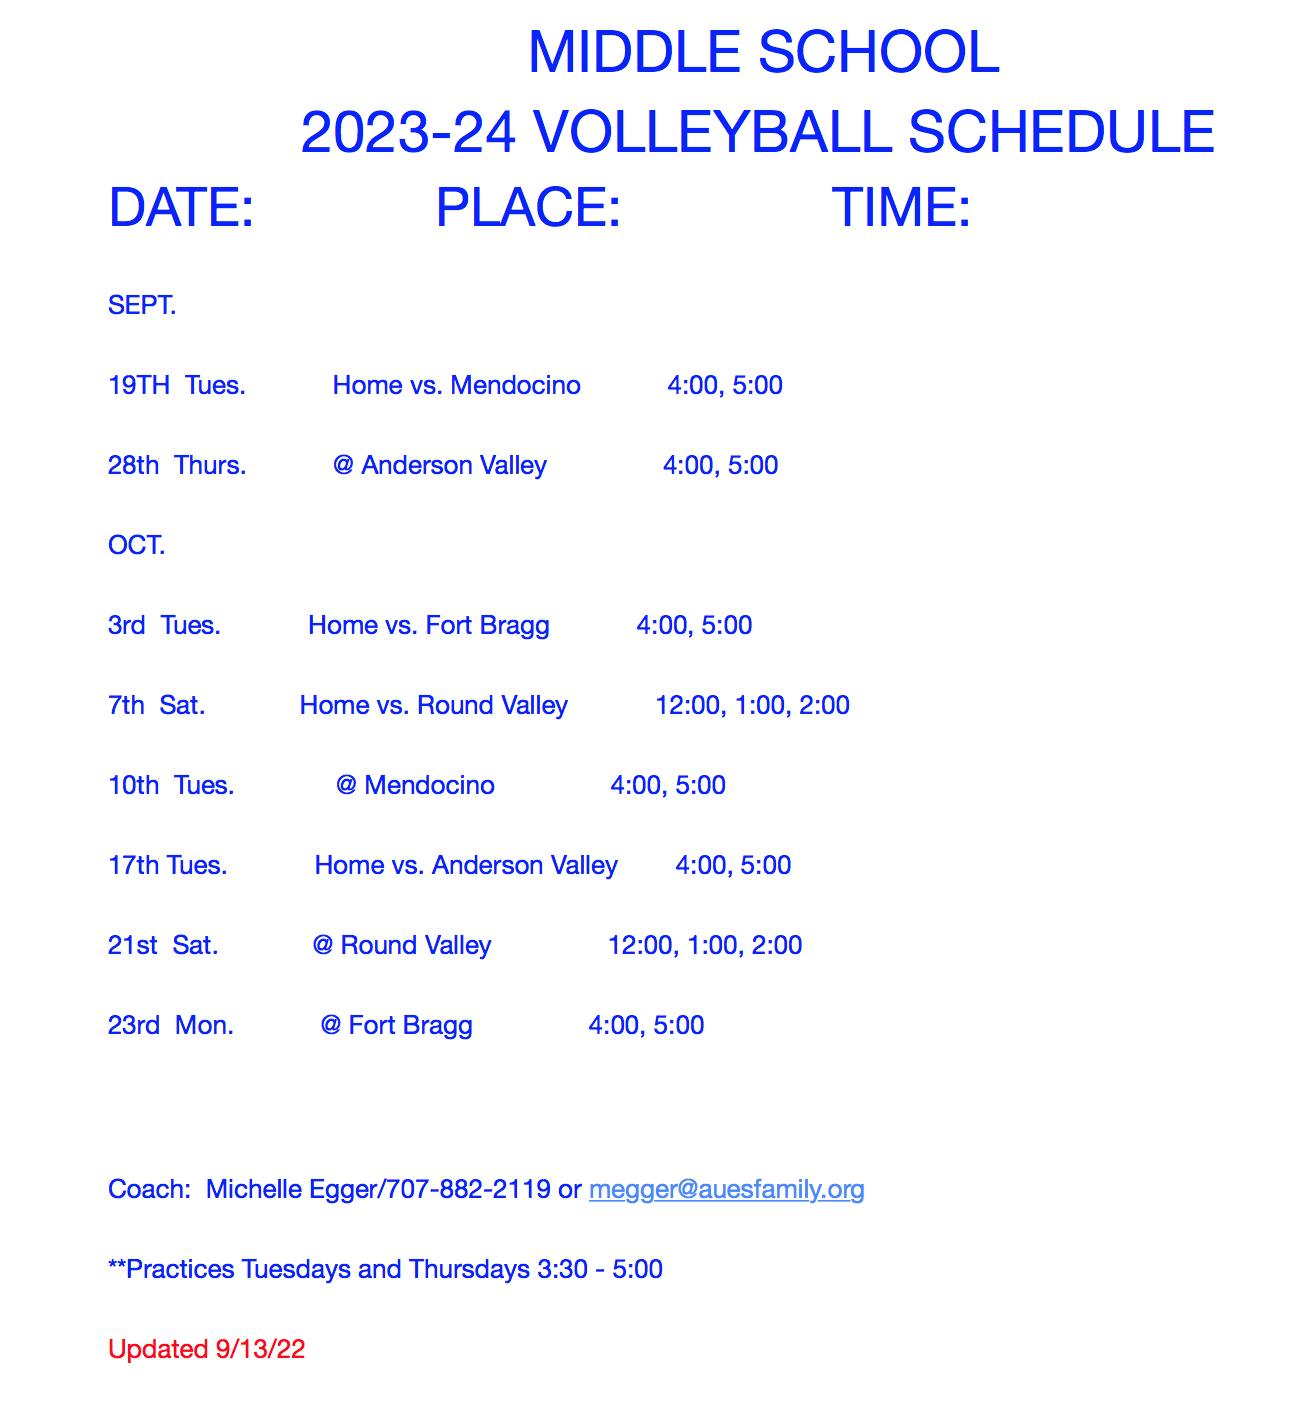 Middle School Girls volleyball 2023